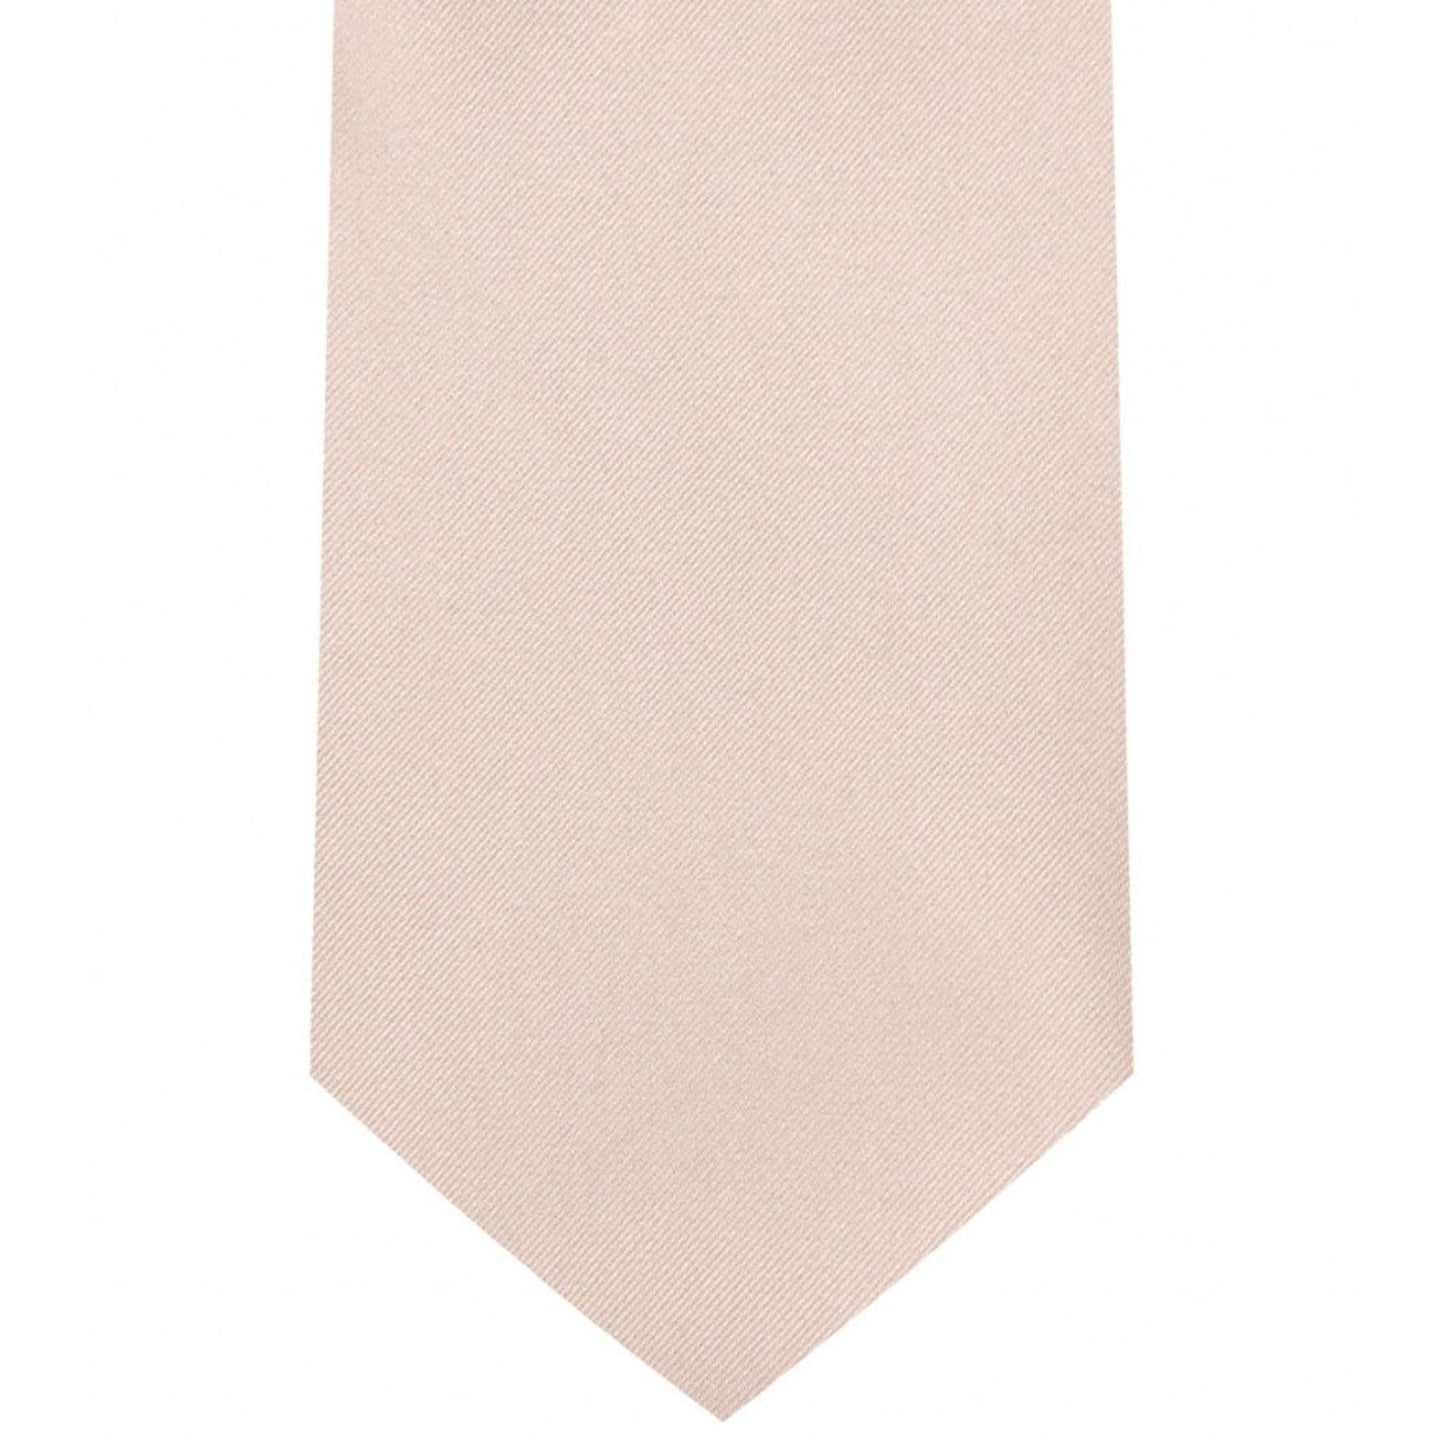 Classic Light Blush Tie Regular width 3.5 inches With Matching Pocket Square | KCT Menswear 